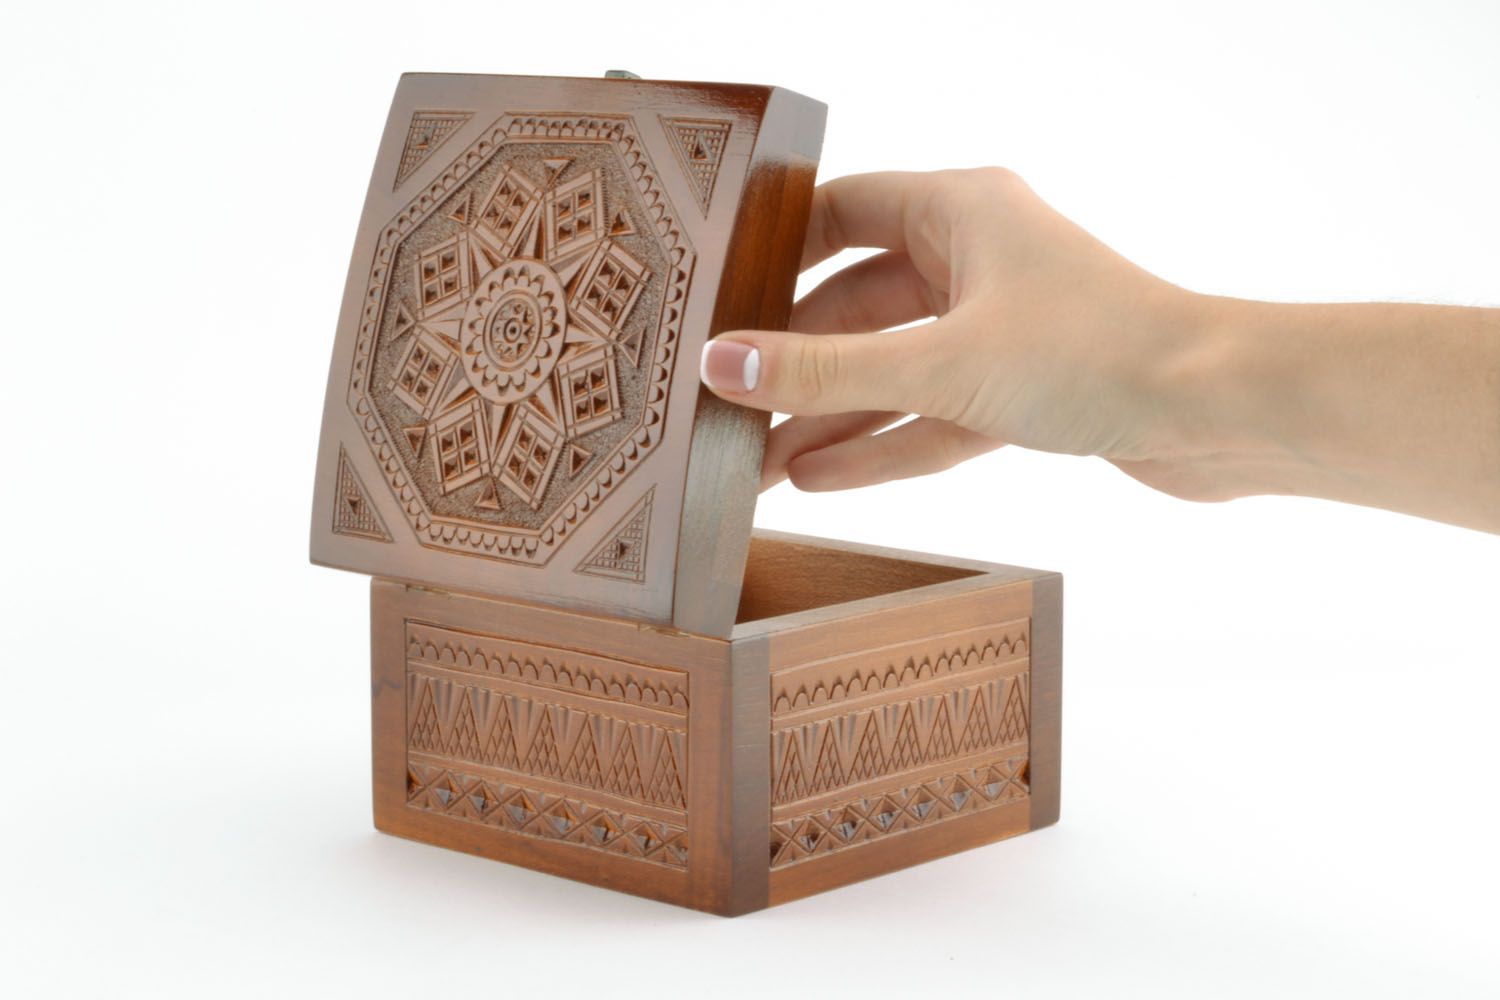 Wooden carved box photo 2